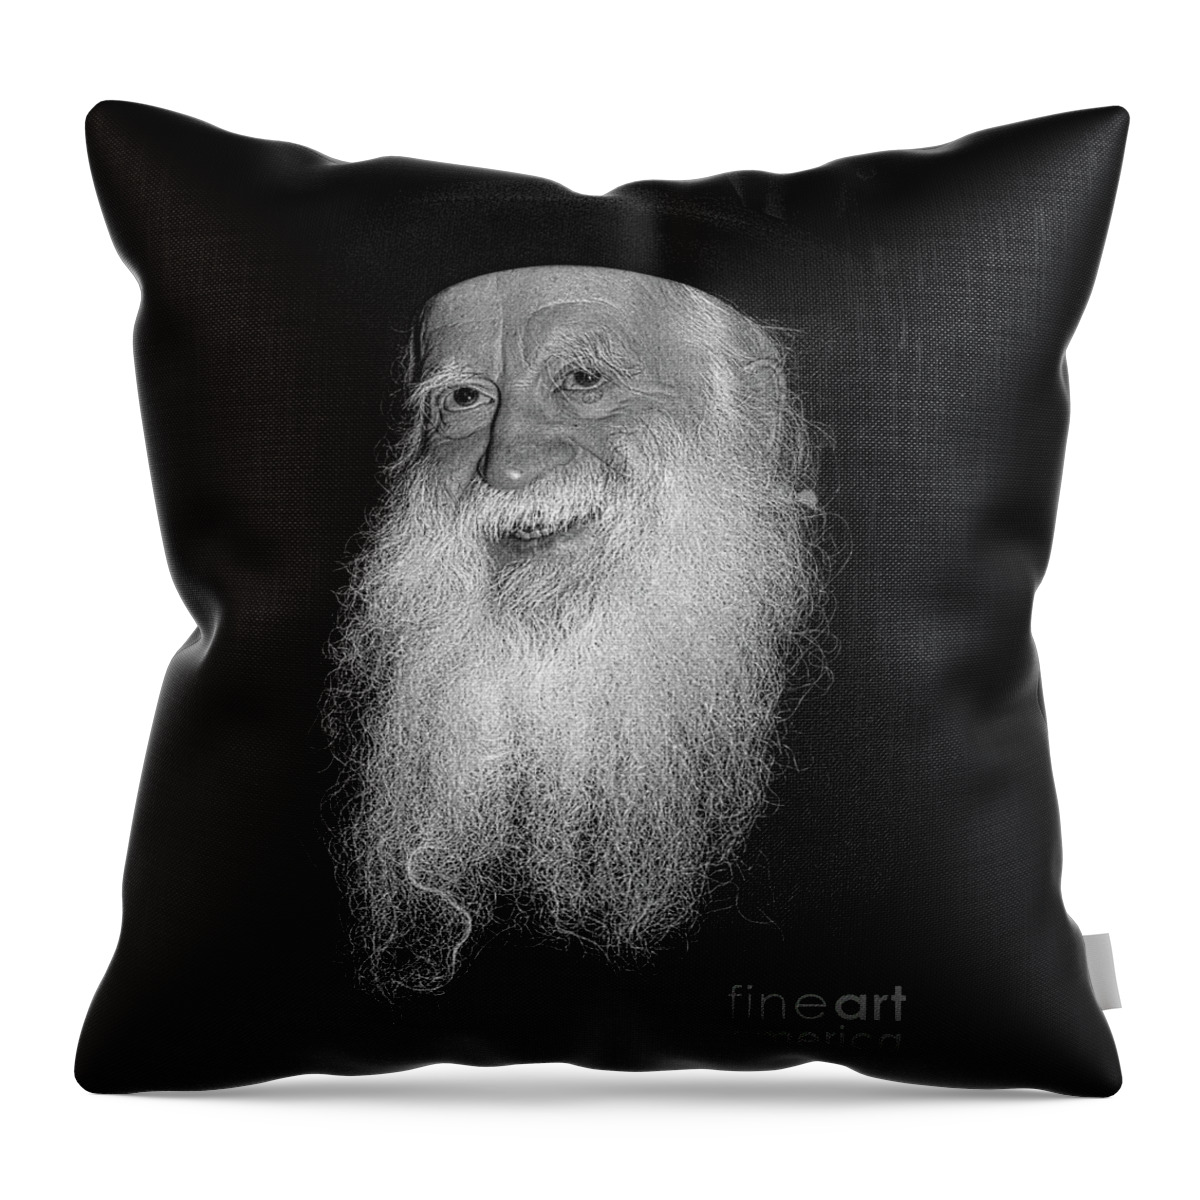 Segal Throw Pillow featuring the photograph Rabbi Yehuda Zev Segal - Doc Braham - All Rights Reserved by Doc Braham